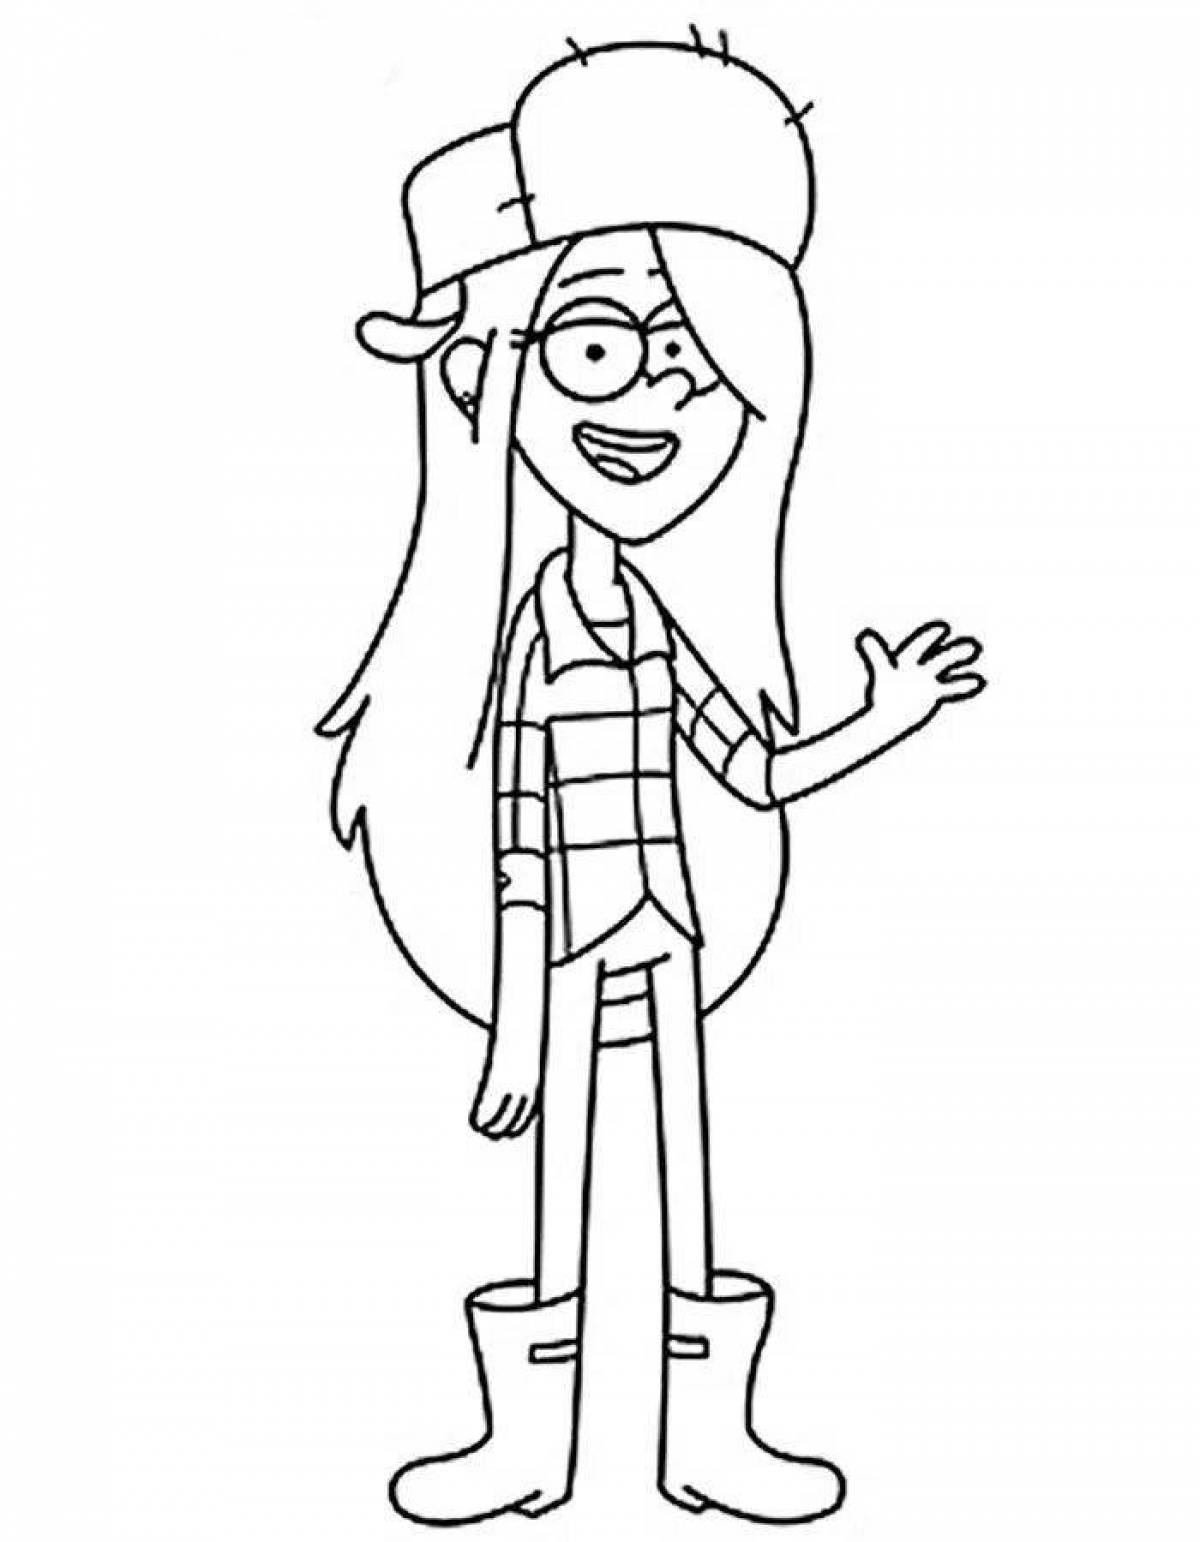 Adorable Gravity Falls light coloring page